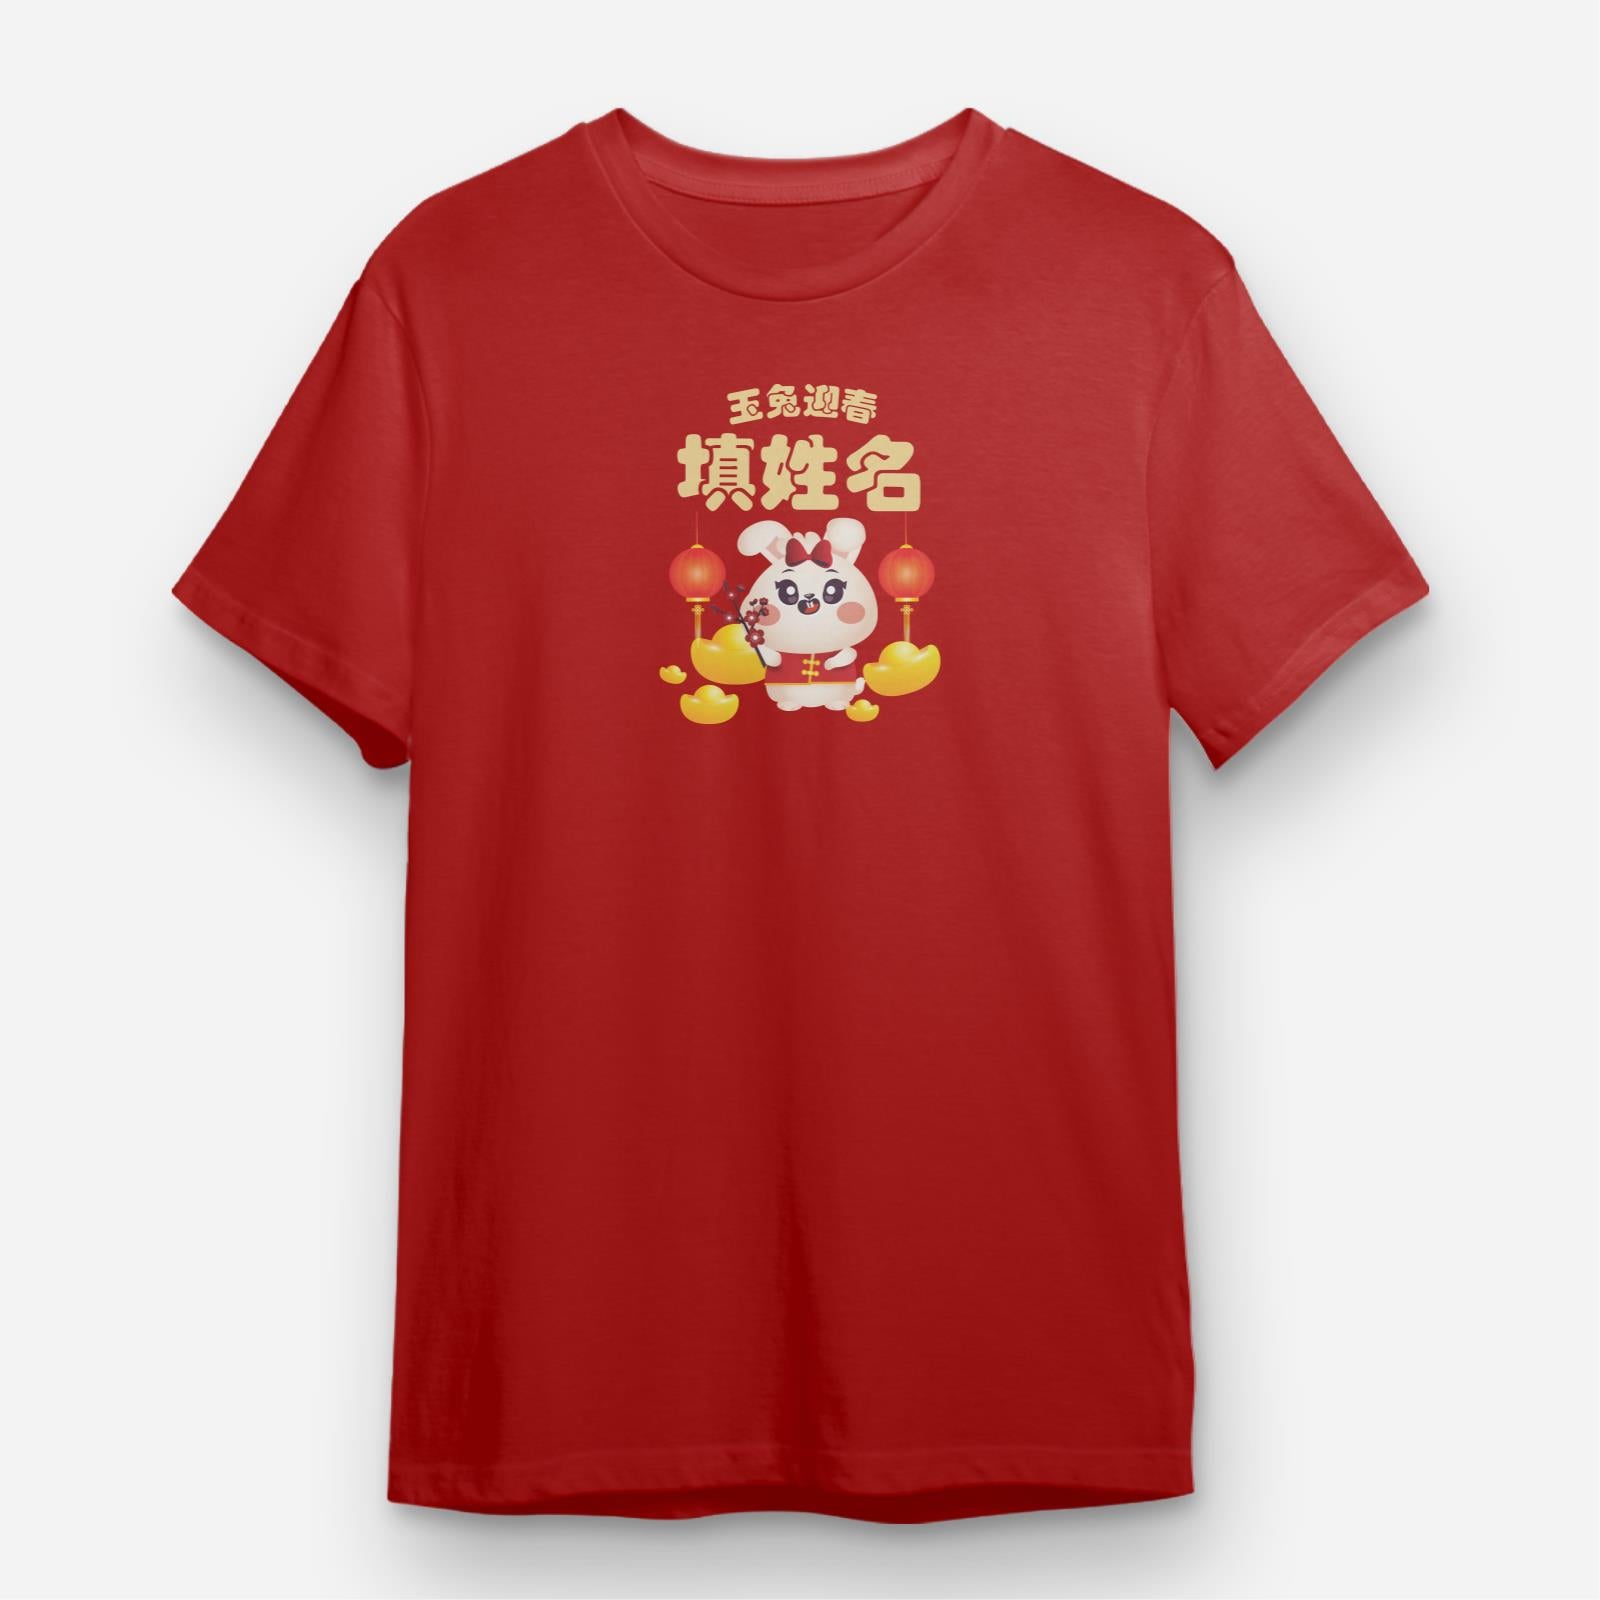 Cny Rabbit Family - Sister Rabbit Unisex Tee Shirt with Chinese Personalization